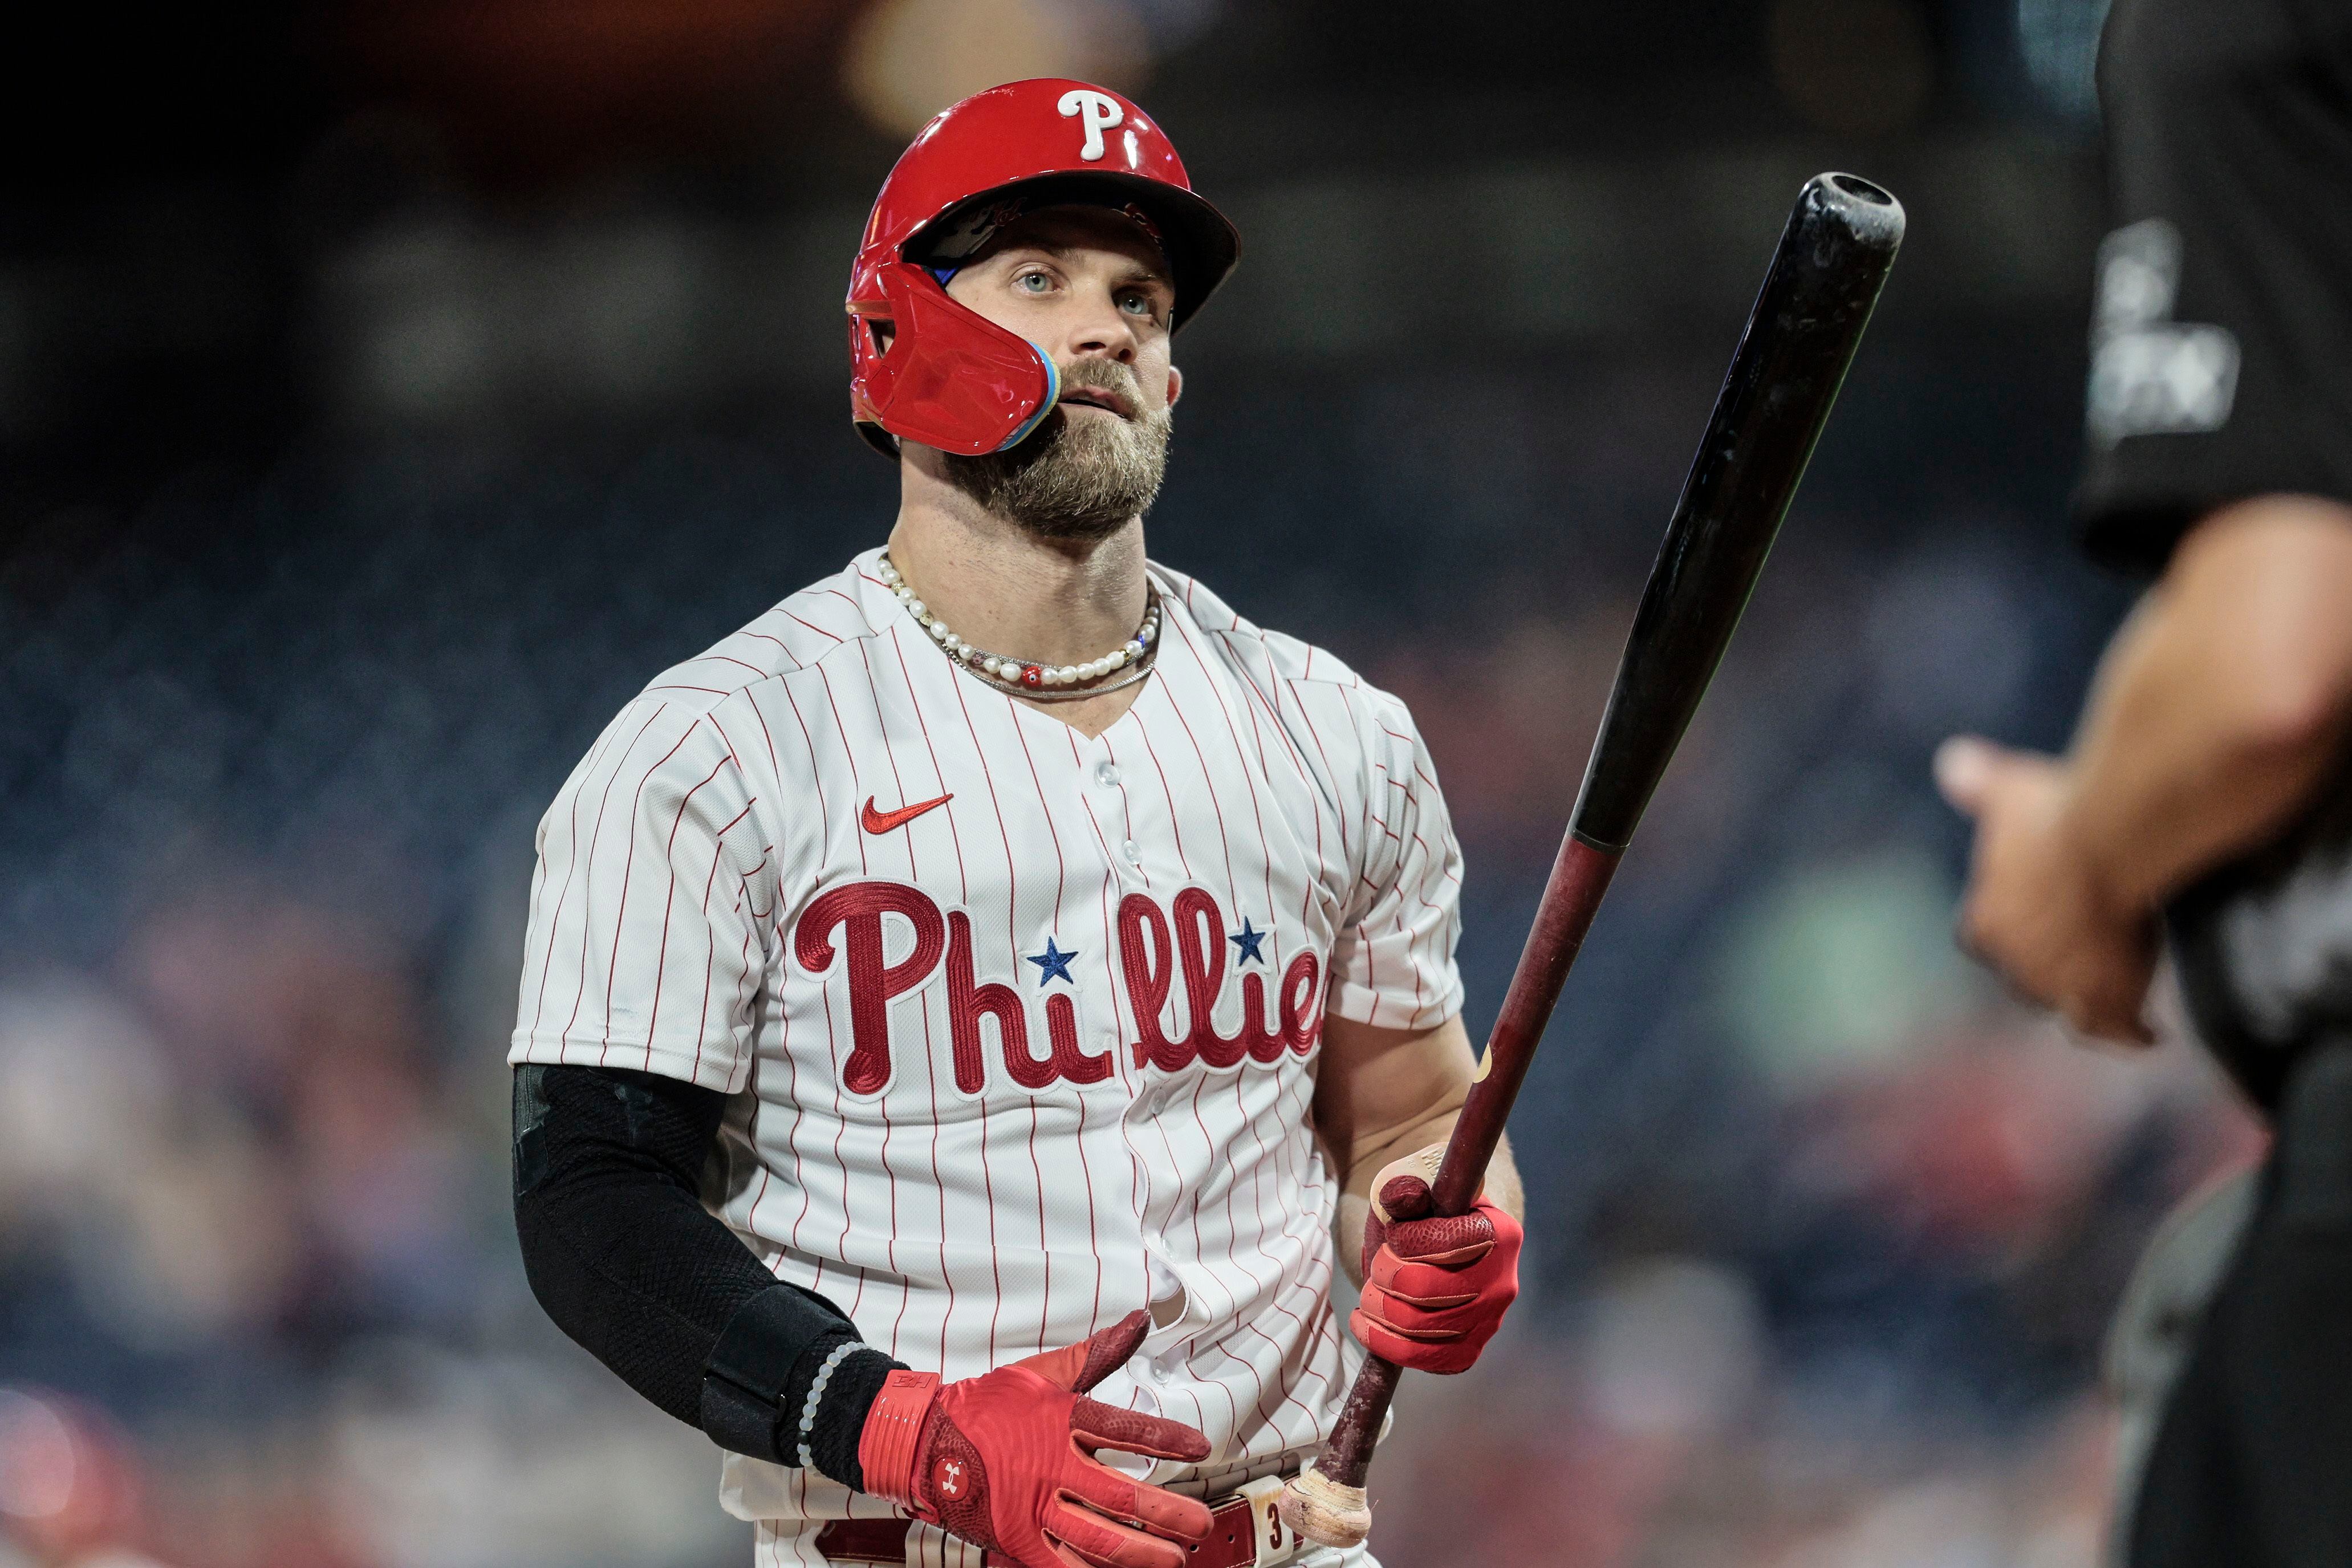 Chins up, heads high: Things are bound to get better for the 2019 Phillies.  - The Good Phight